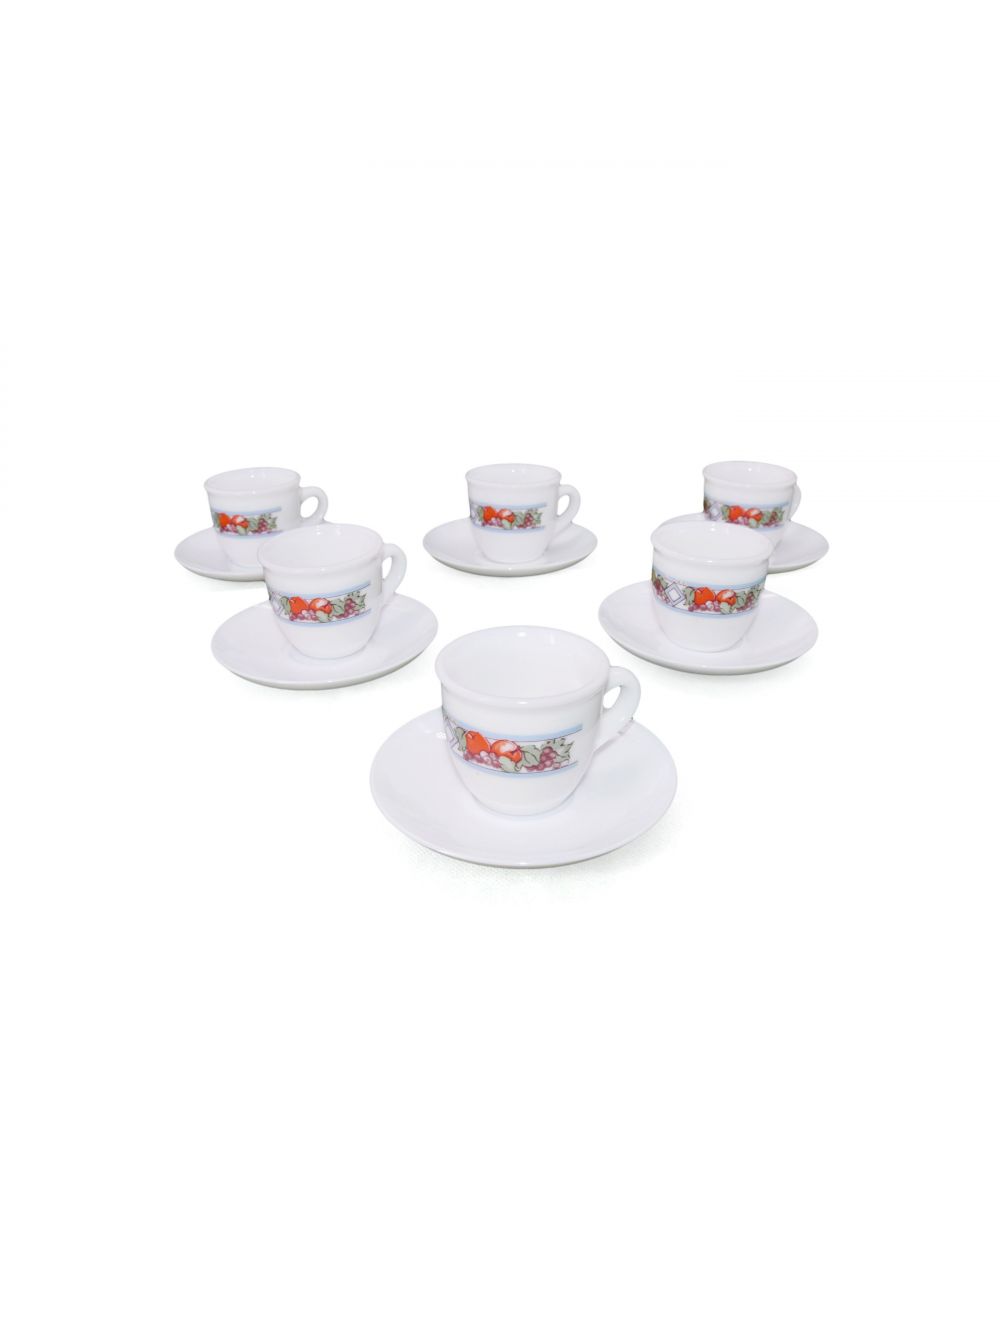 Coffee Cup and Saucer Flower Design In Middle- White 12 Pieces Set